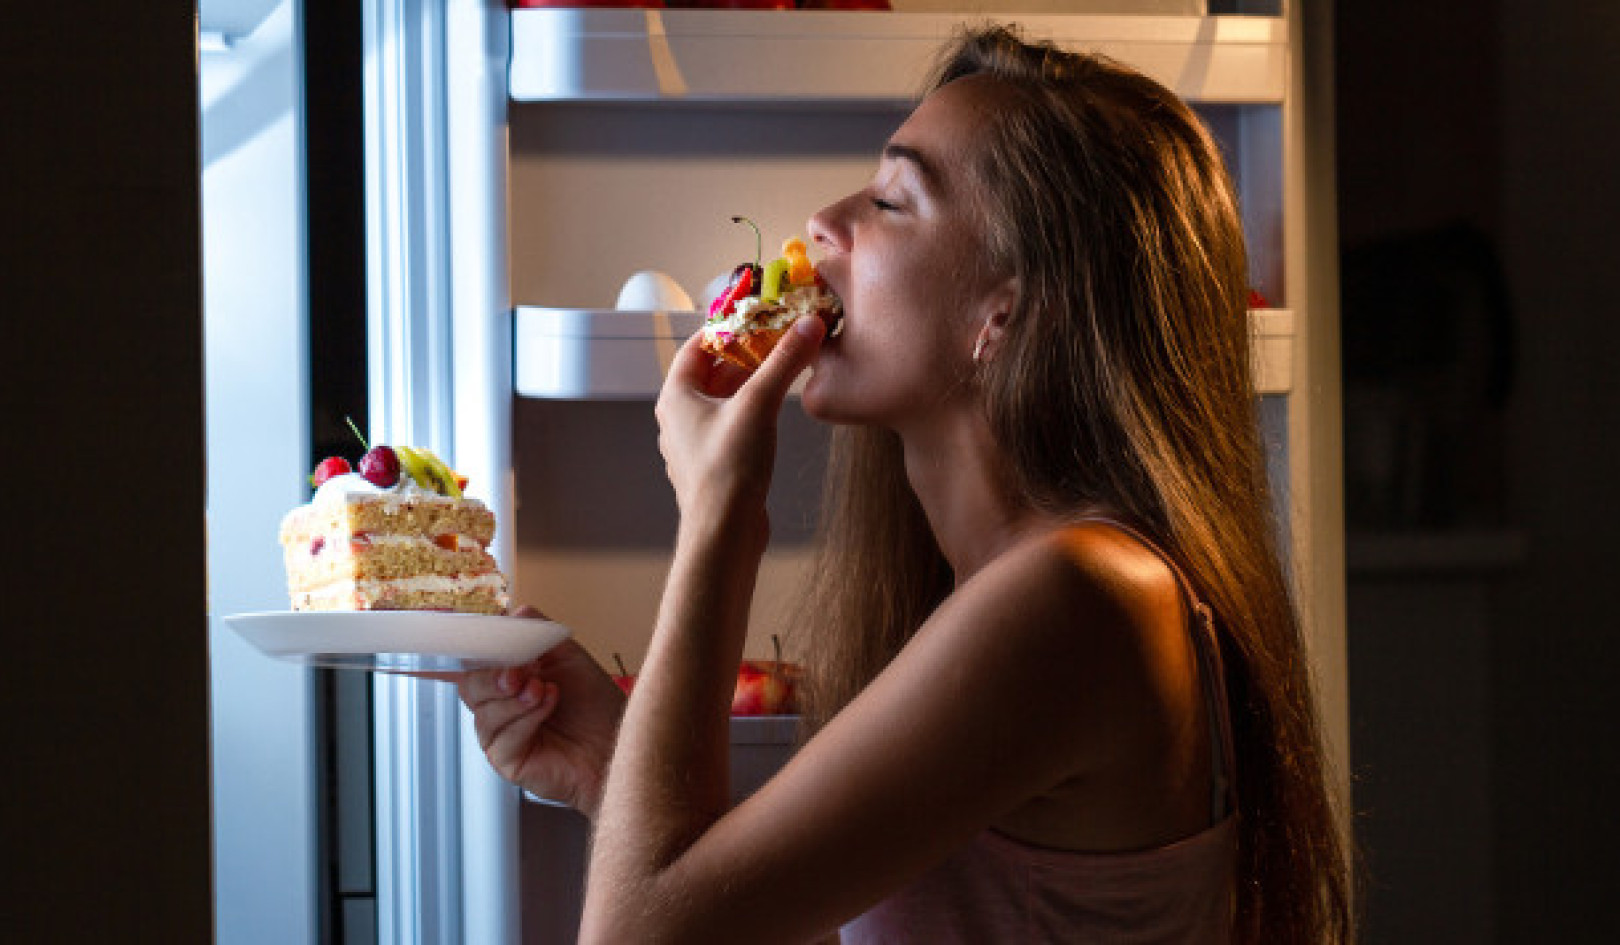 The Bittersweet Reality: Rethinking Our Food Habits